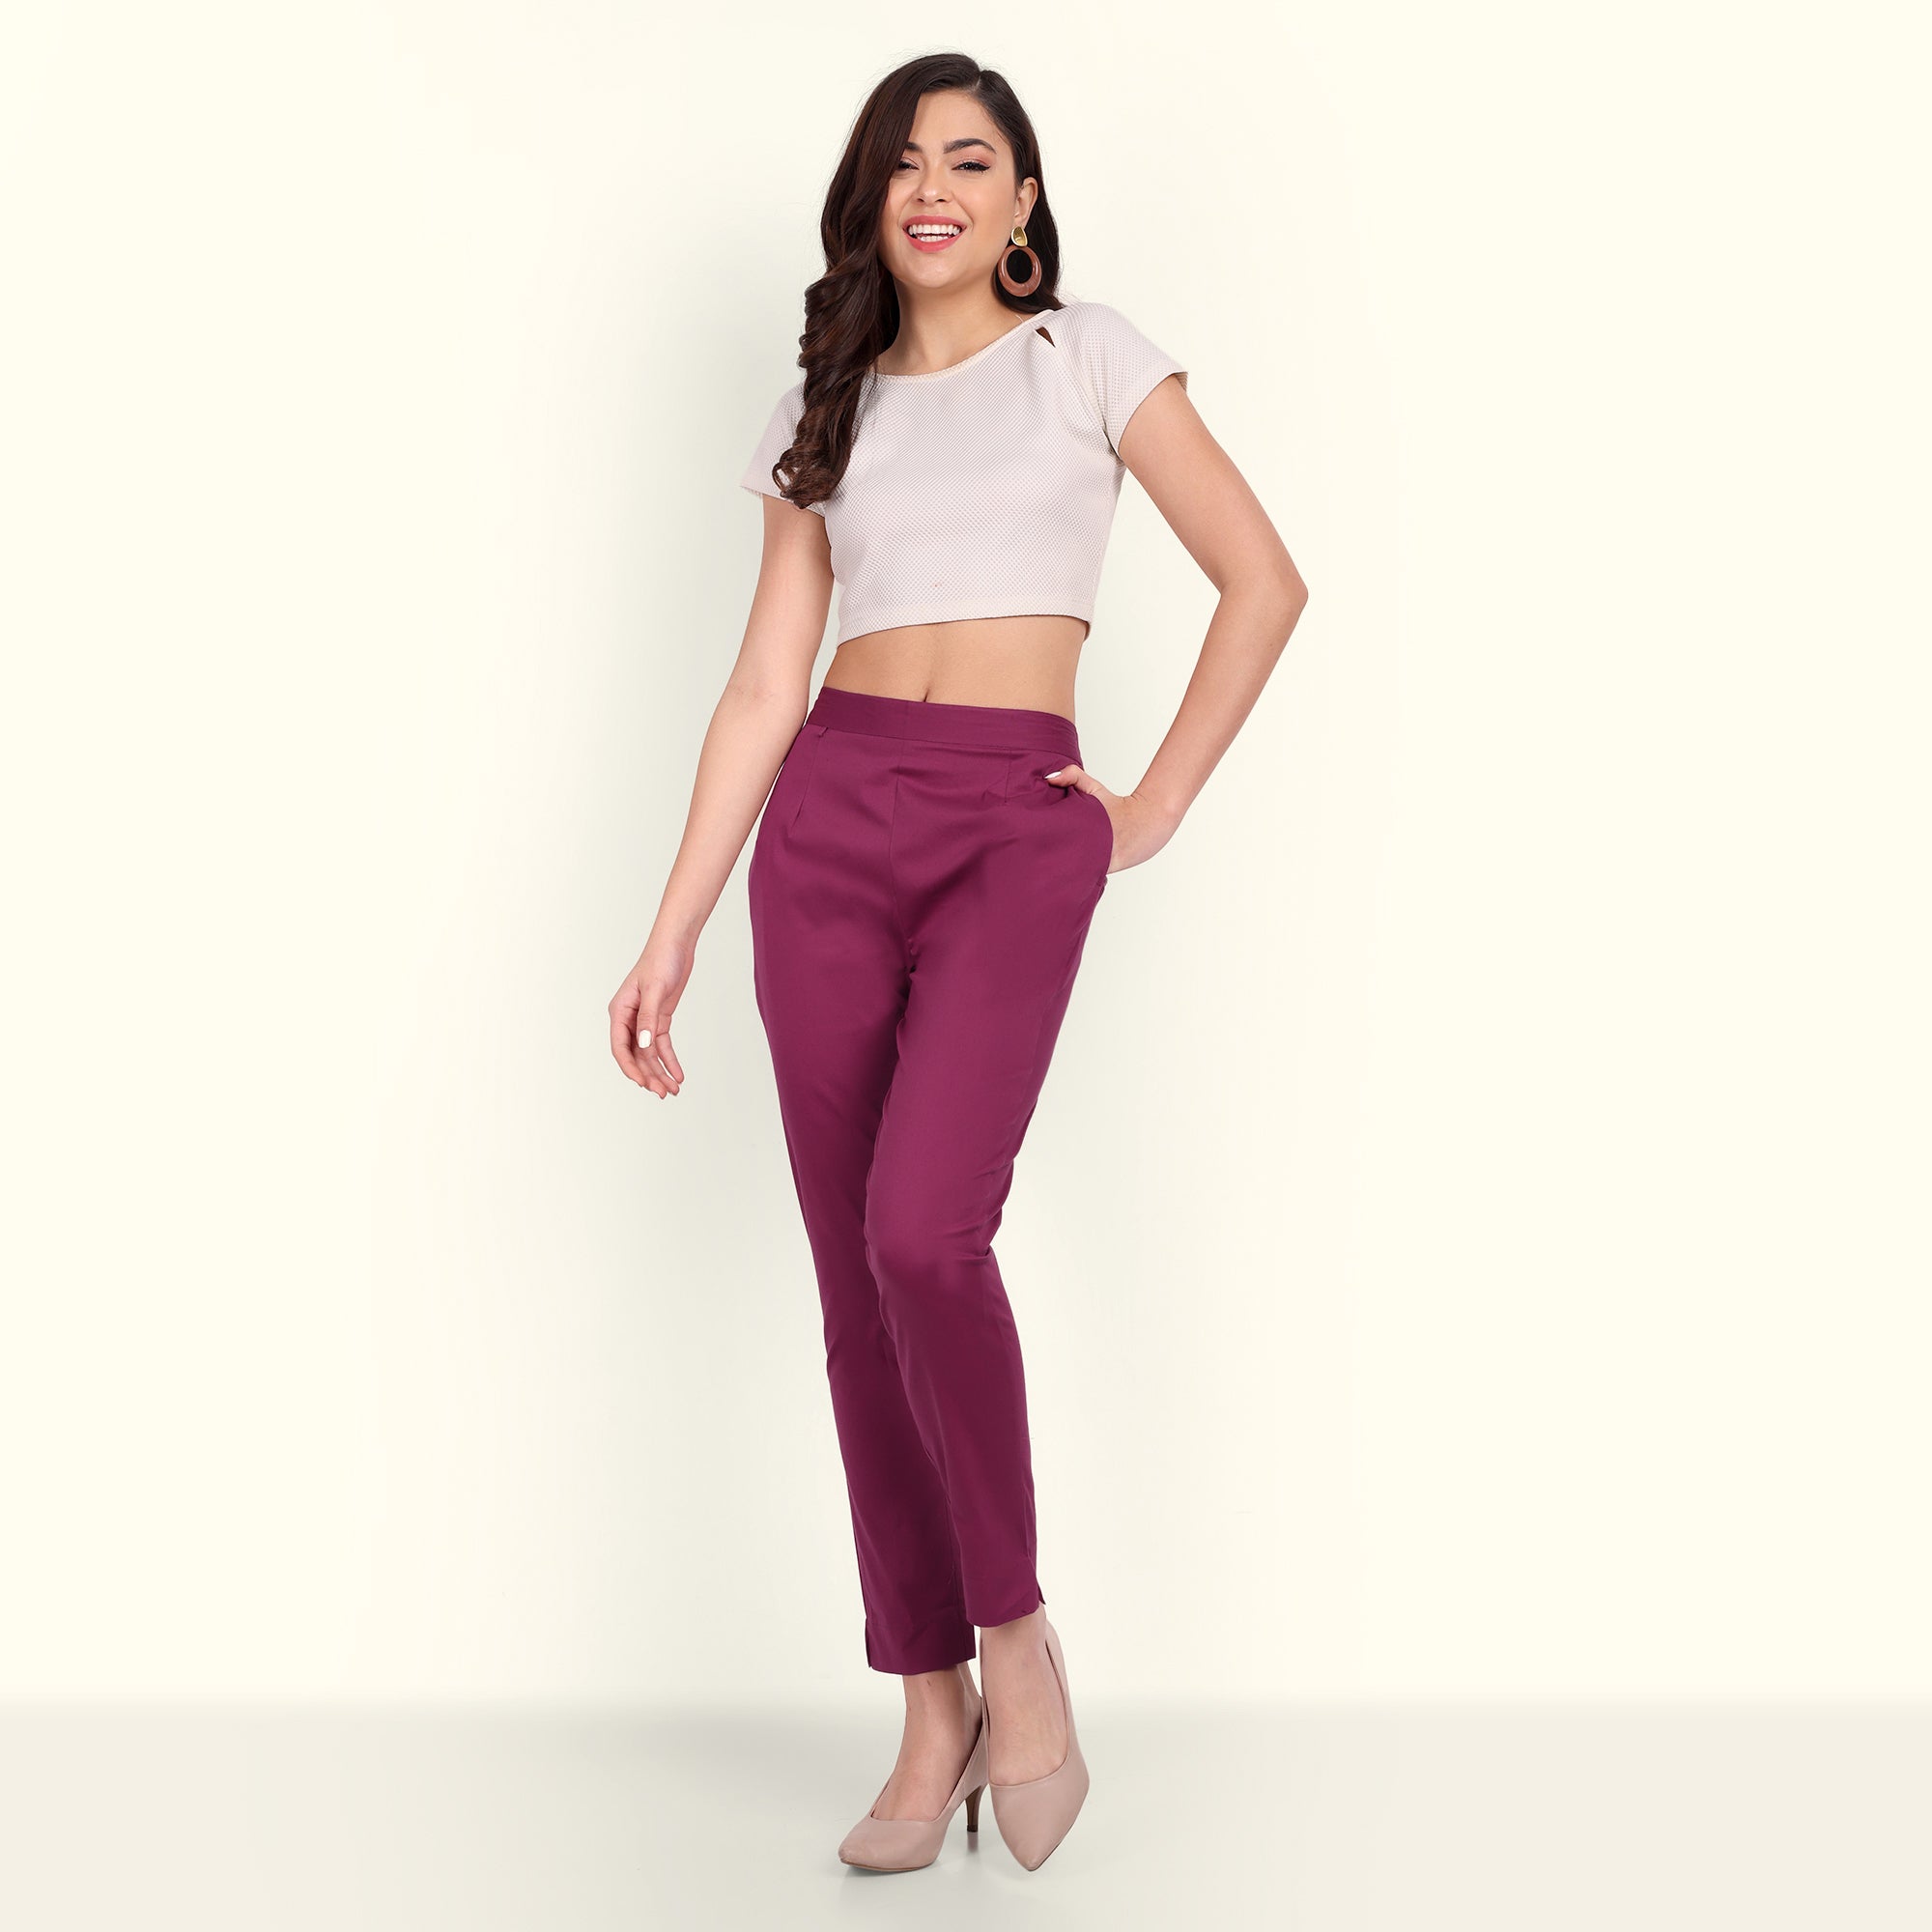 Naariy Rose Taupe Stretchable Cotton Pants for Women